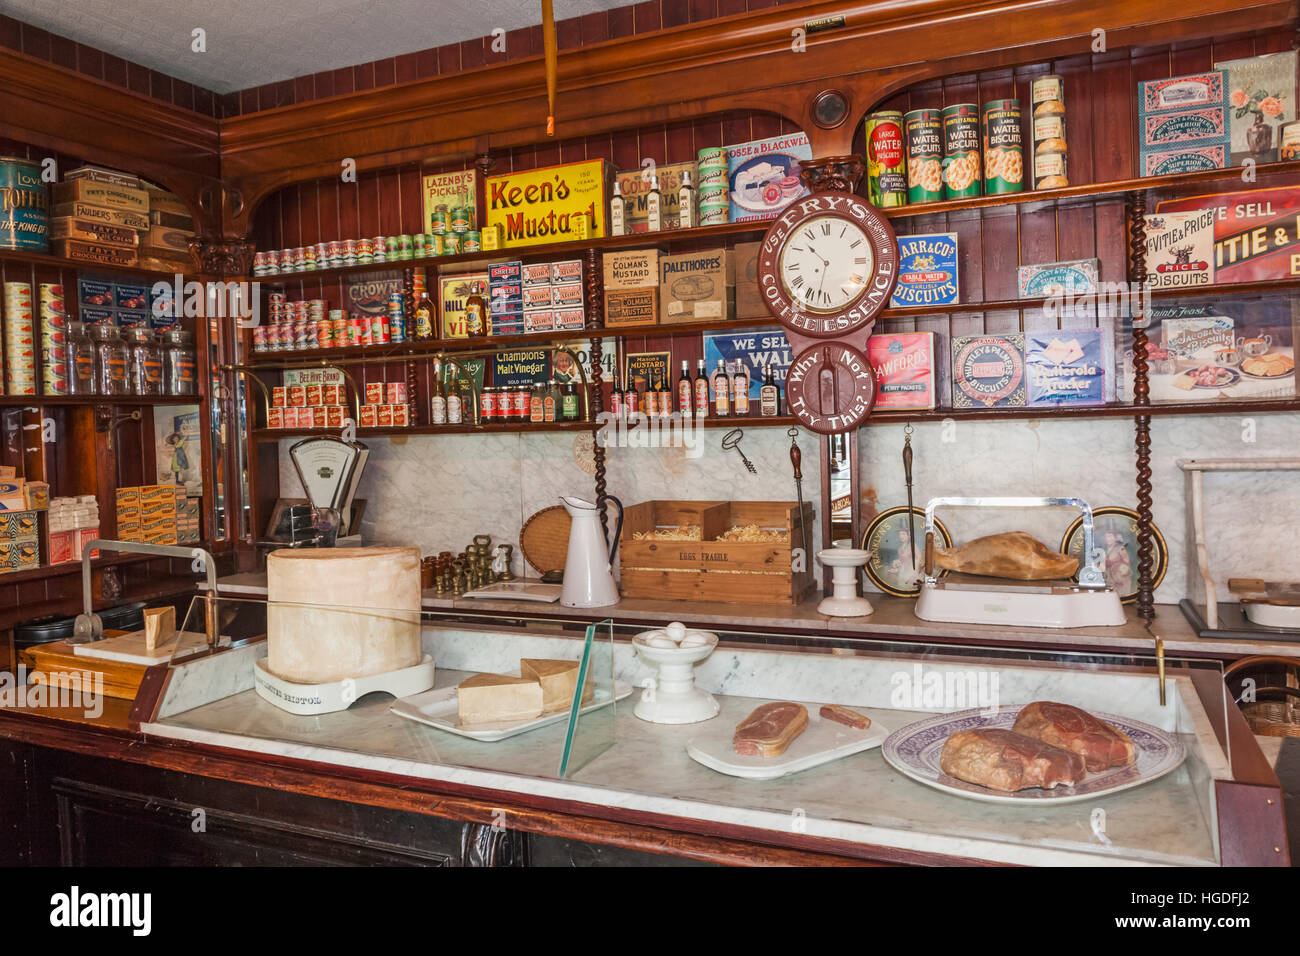 Wales, Cardiff, St Fagan's, Museum of Welsh Life, Gwalia Supply Store, Interior display of Historic and Vintage Food and Household Products Stock Photo